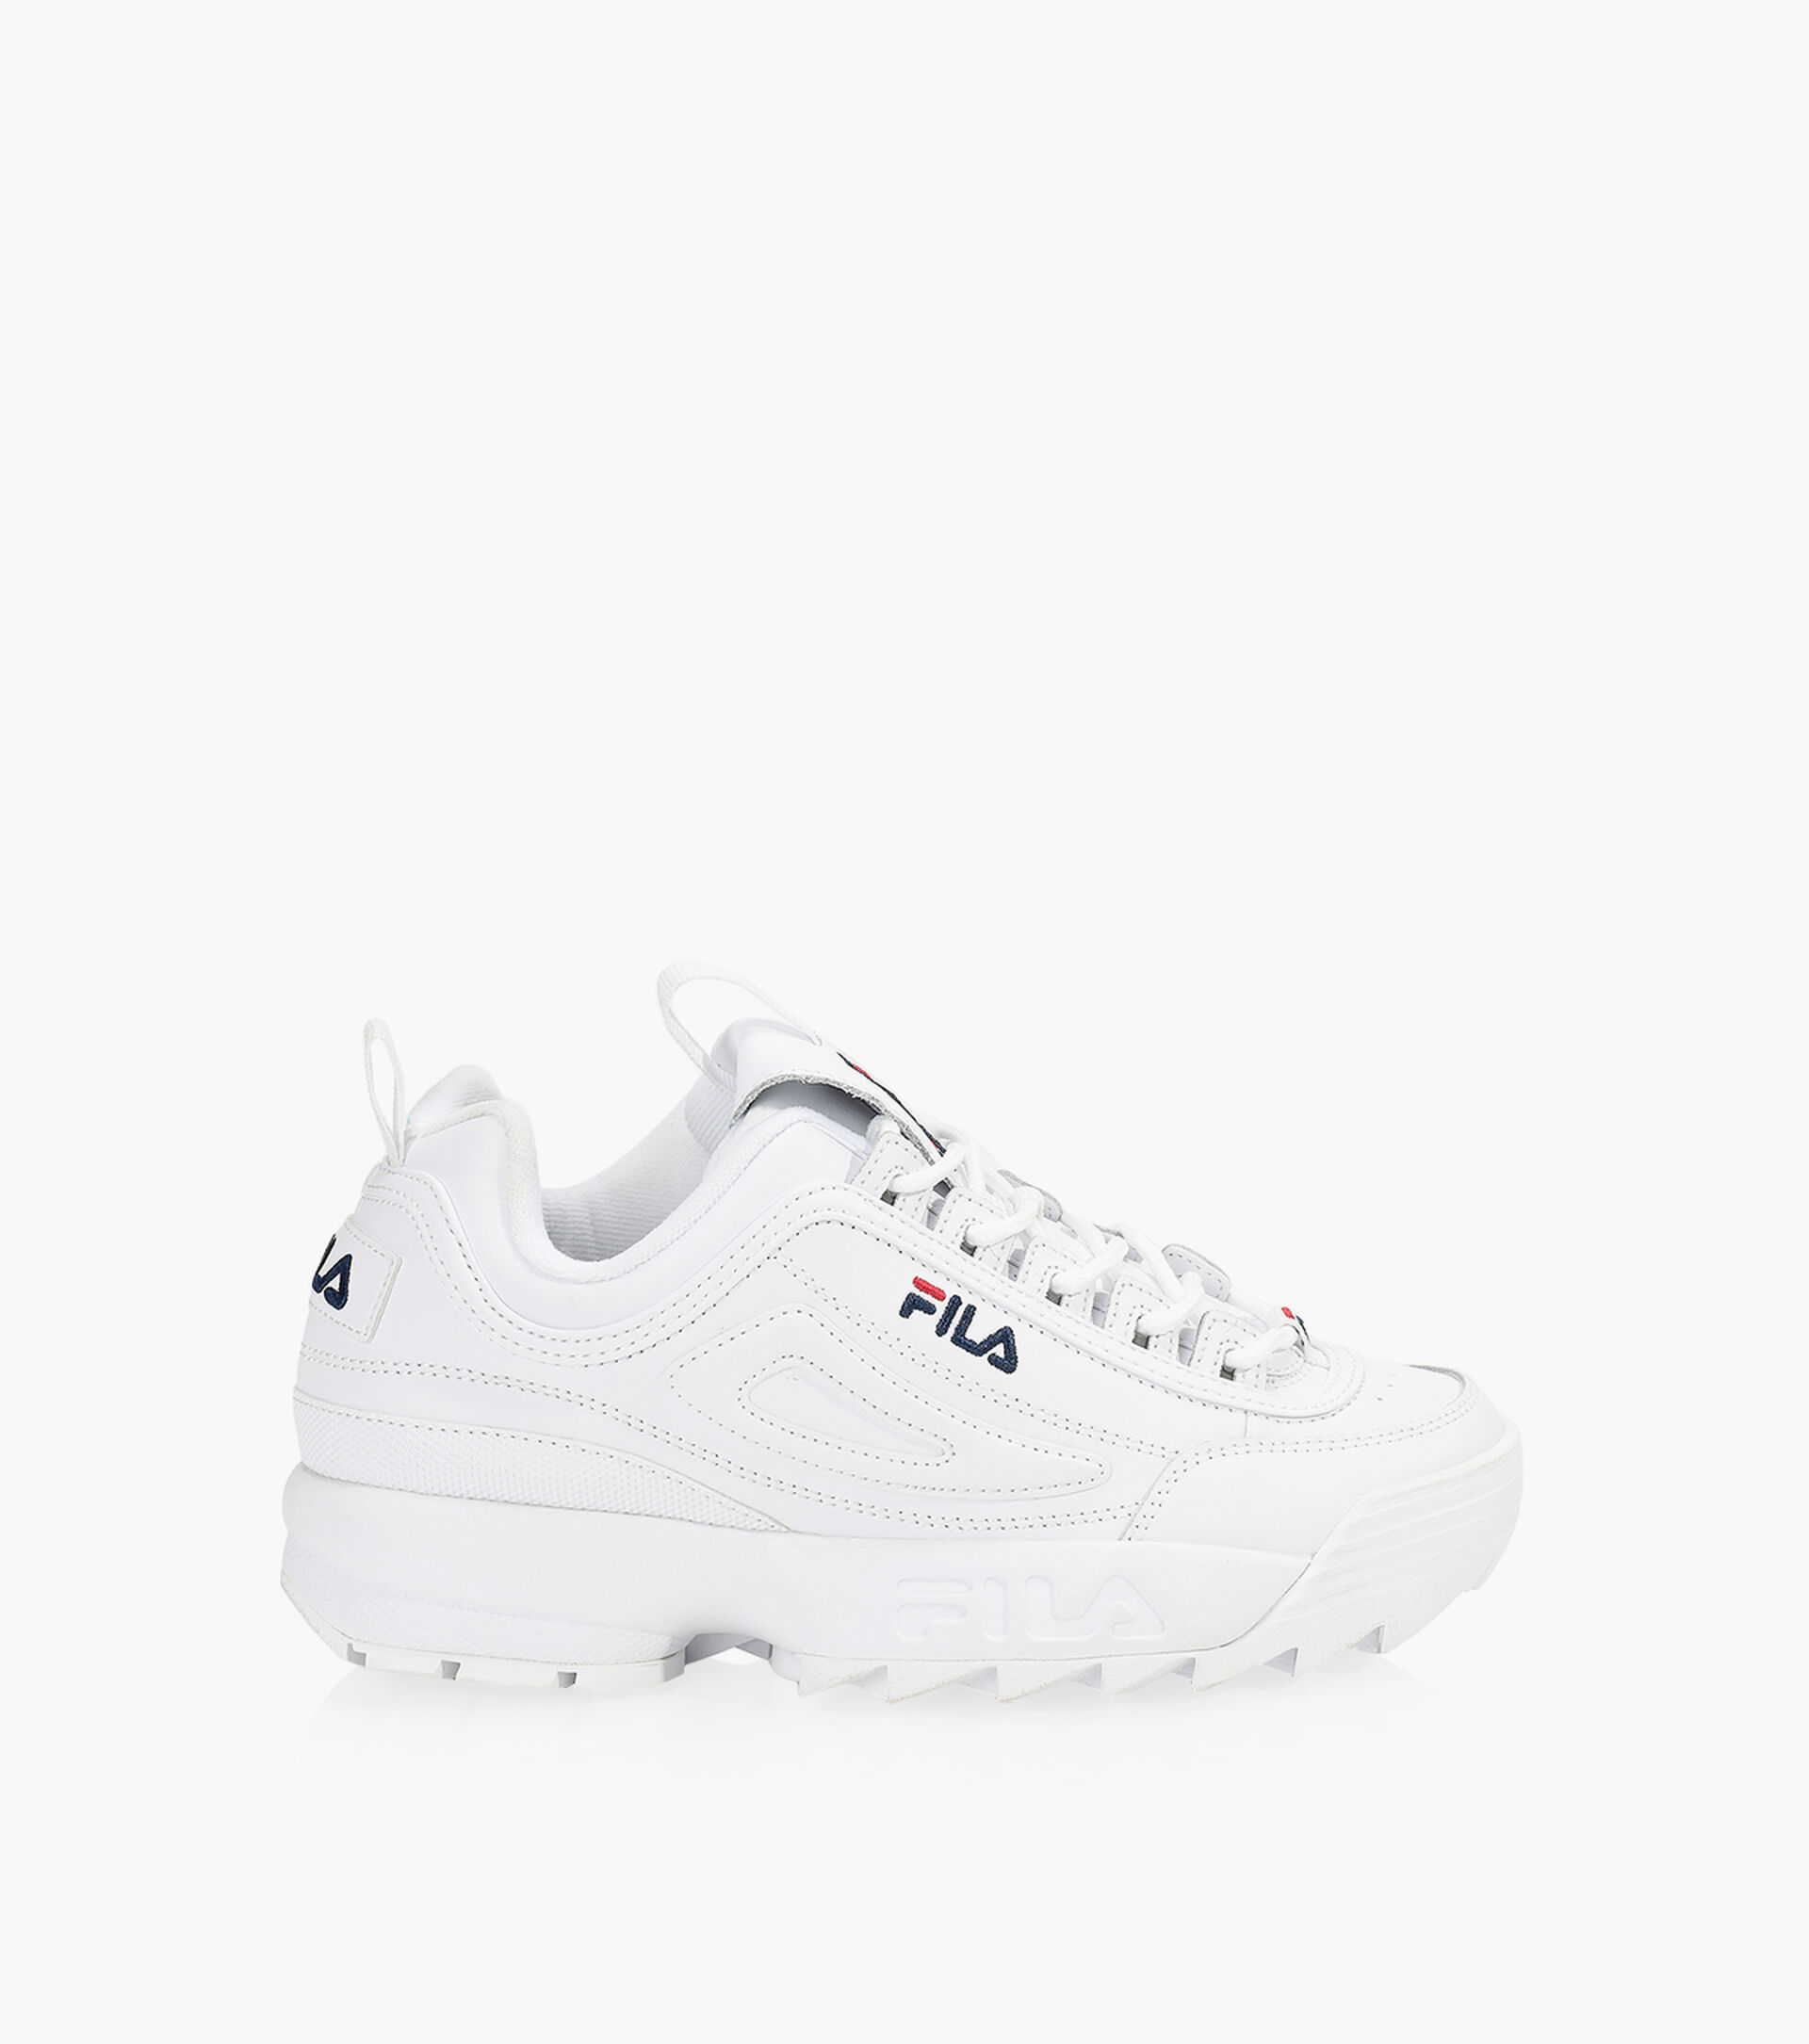 FILA DISRUPTOR 2 PREMIUM - Leather + Synthetic | Browns Shoes